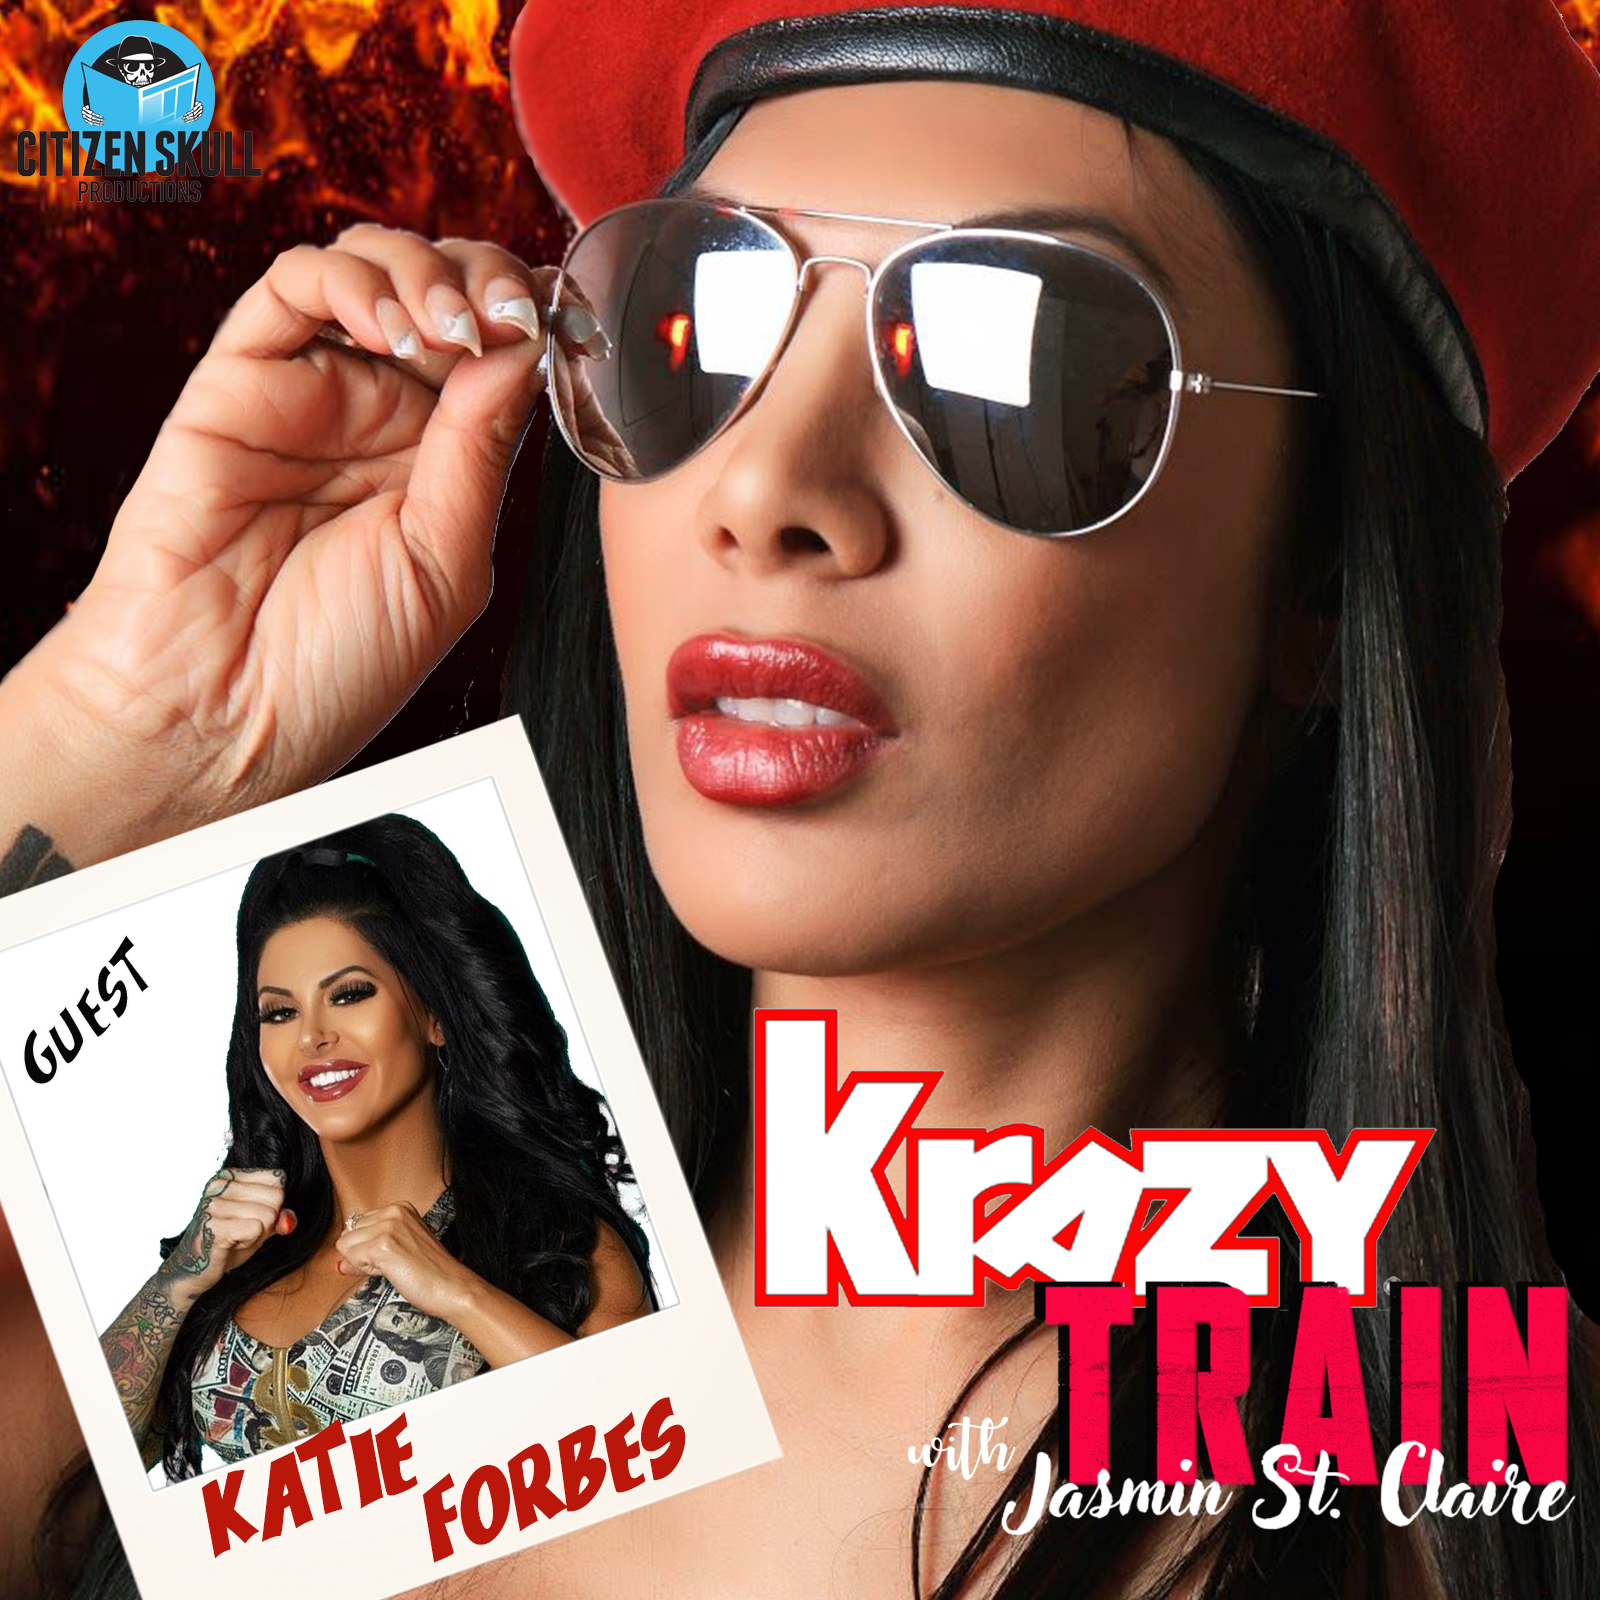 Katie Forbes Porn Video - Krazy Train with Jasmin St. Claire